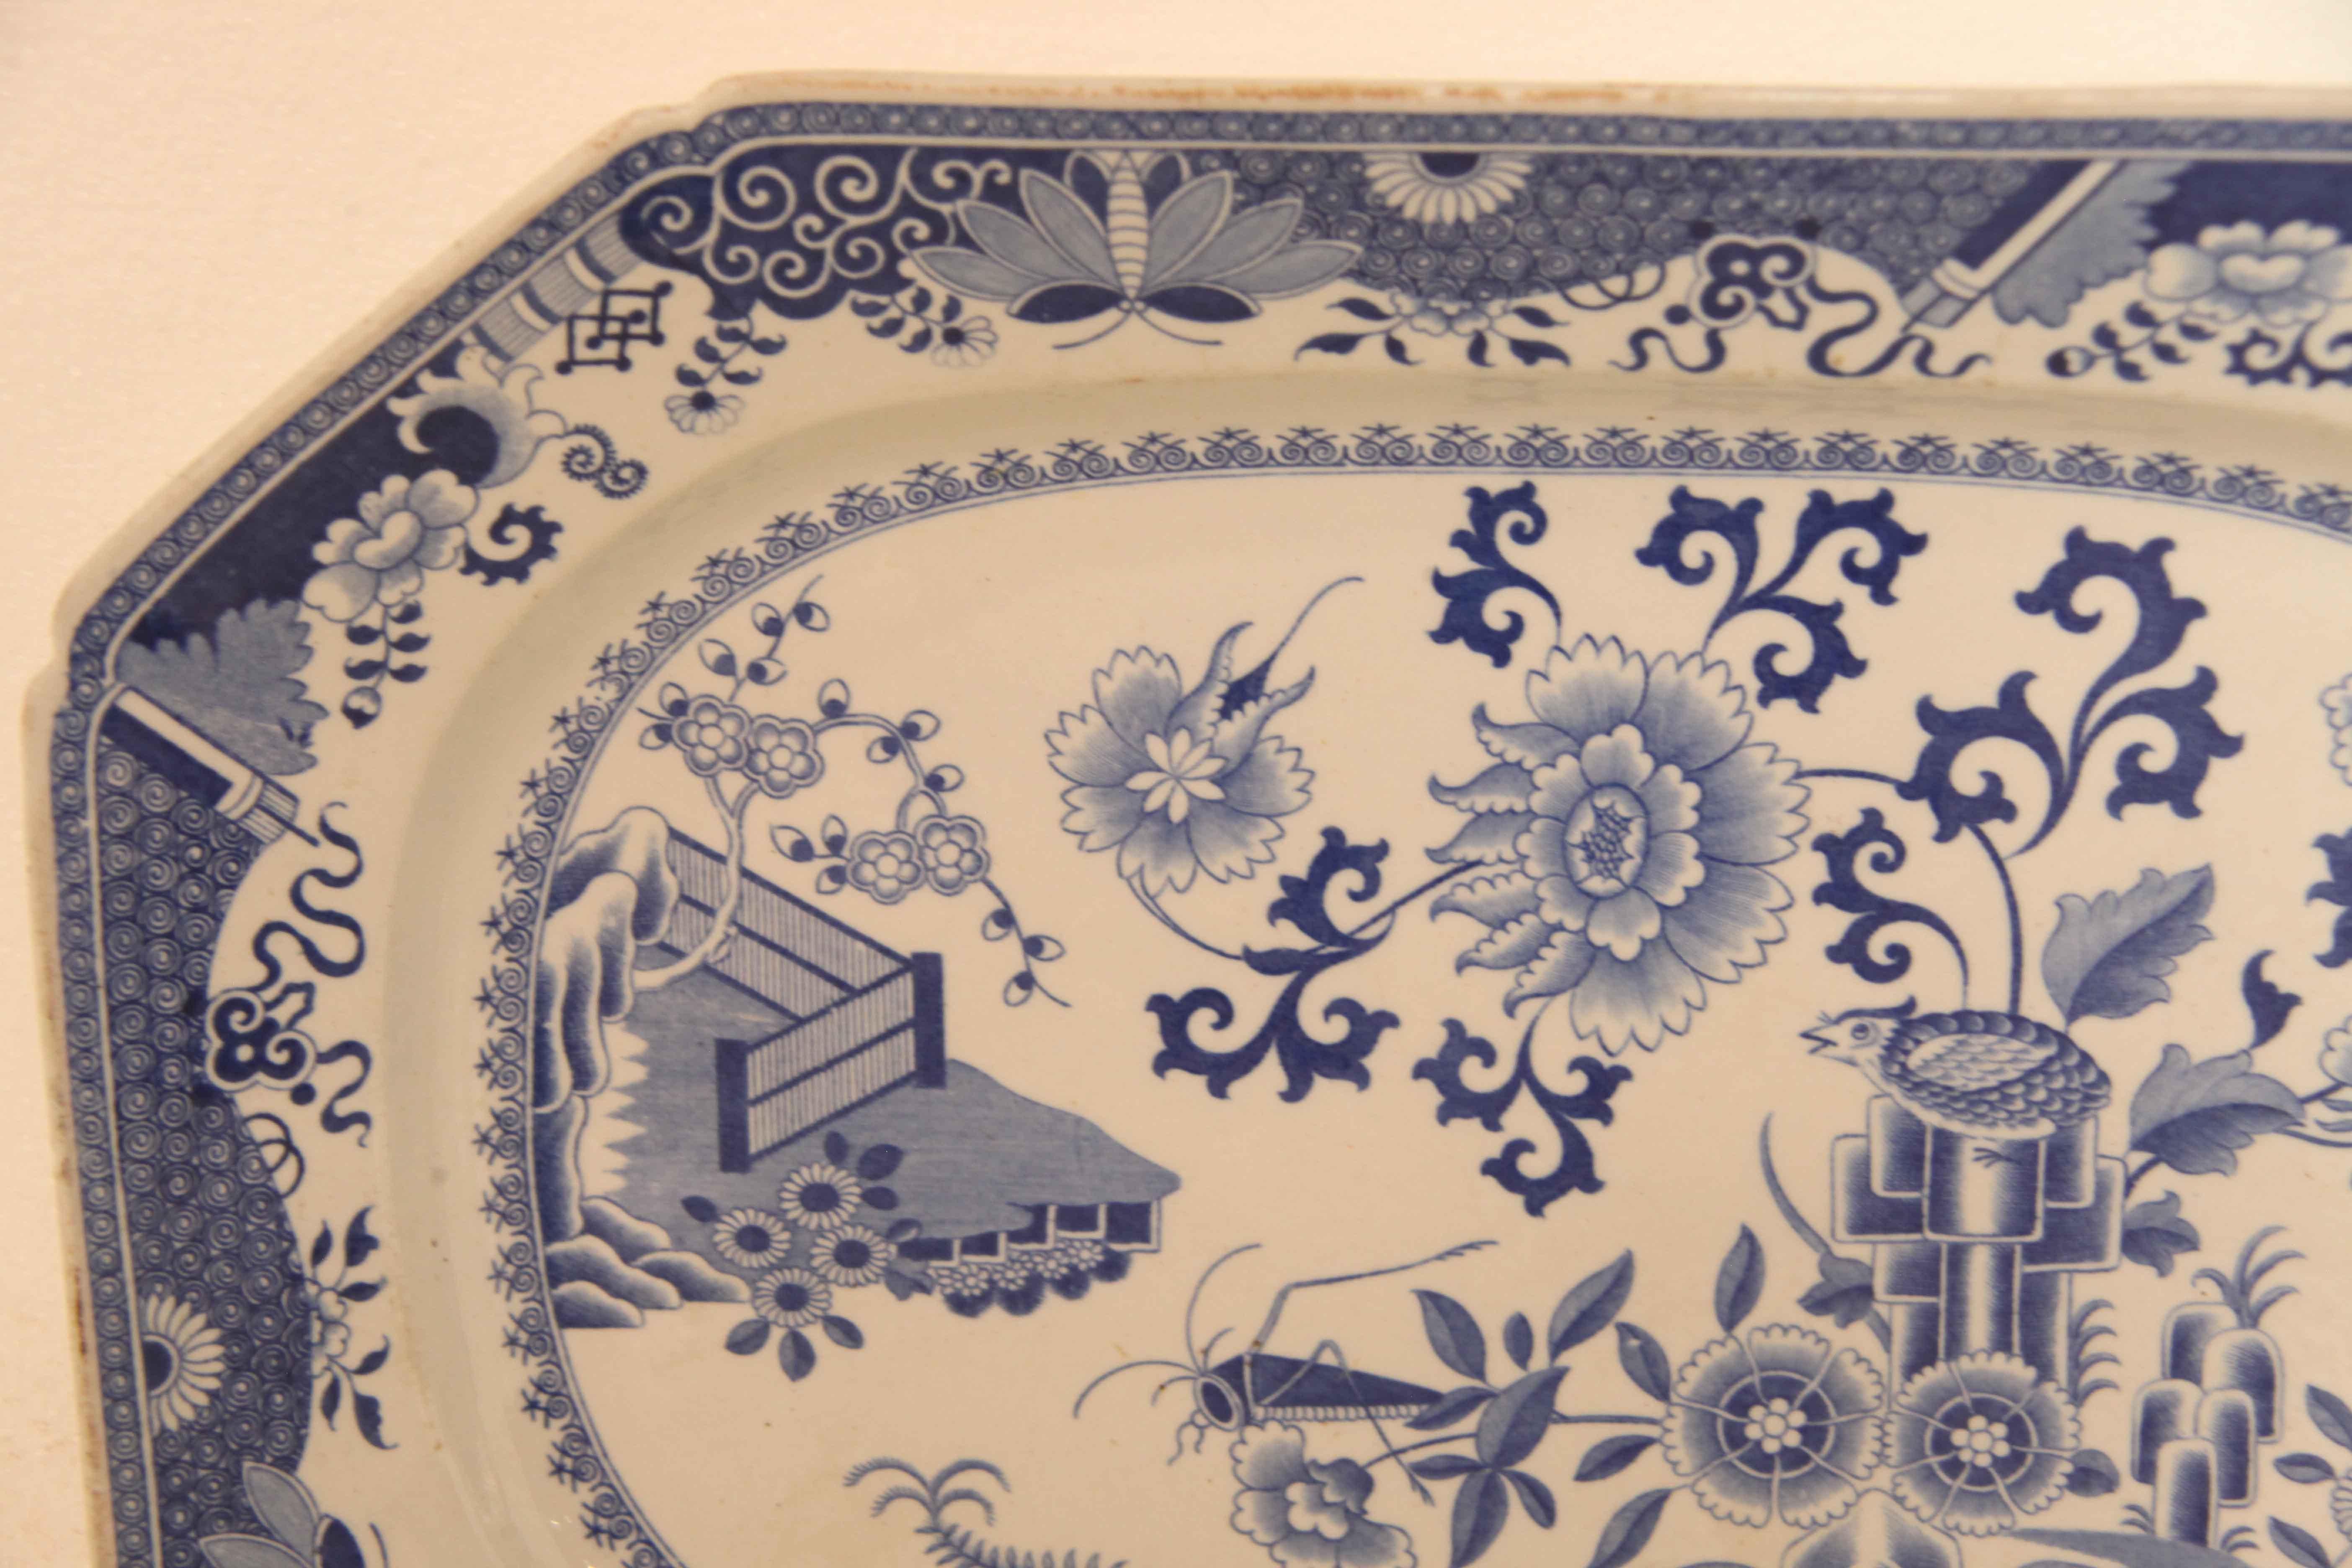 Blue and white spode platter, the pinched corner rim is followed by a border with dragonflies, flowers, foliage and various oriental motifs.  The main body features small and large flowers along with trailing foliage, a bird and dragonfly.  The mark